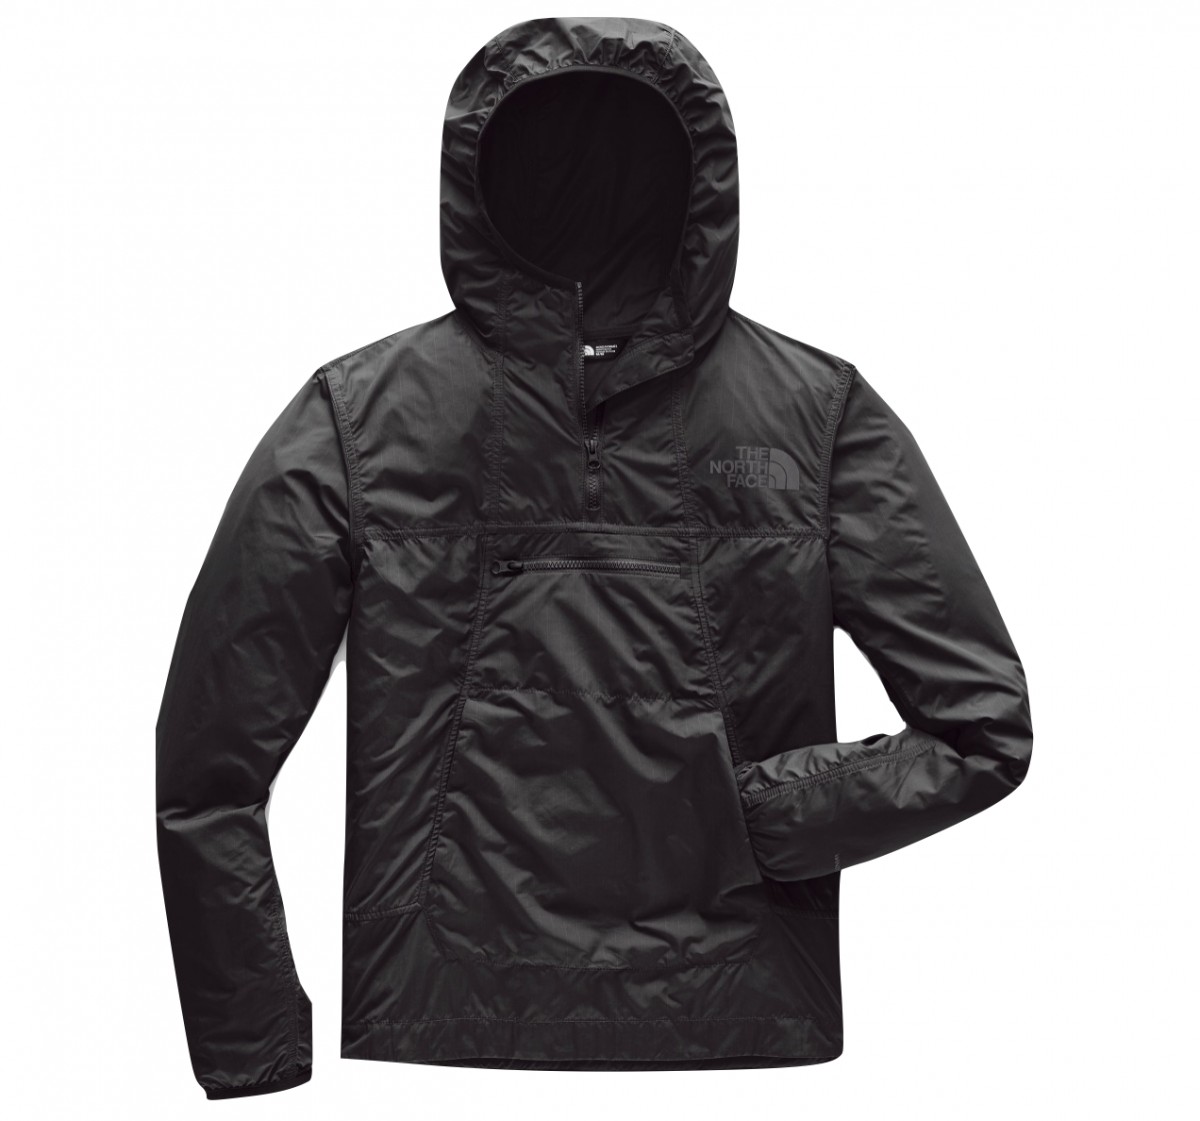 The North Face Crew Run Wind Anorak Review